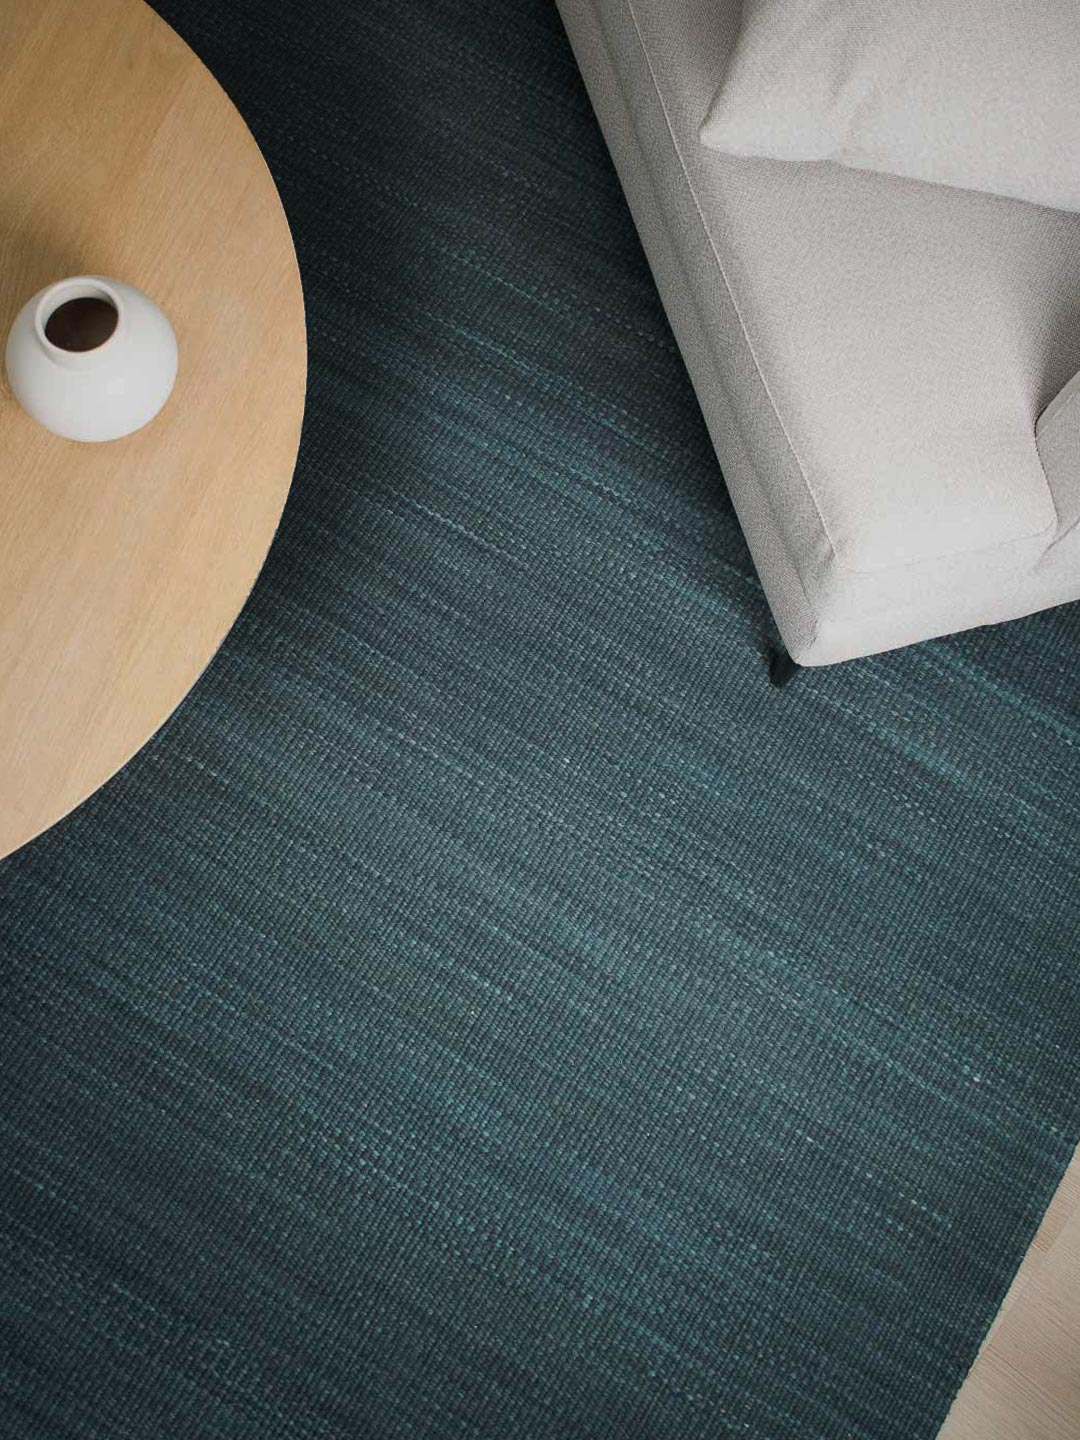 Yarra Rug Ocean is 20% off from the Rug Collection Stockist Make Your House A Home, Furniture Store Bendigo. Free Australia Wide Delivery